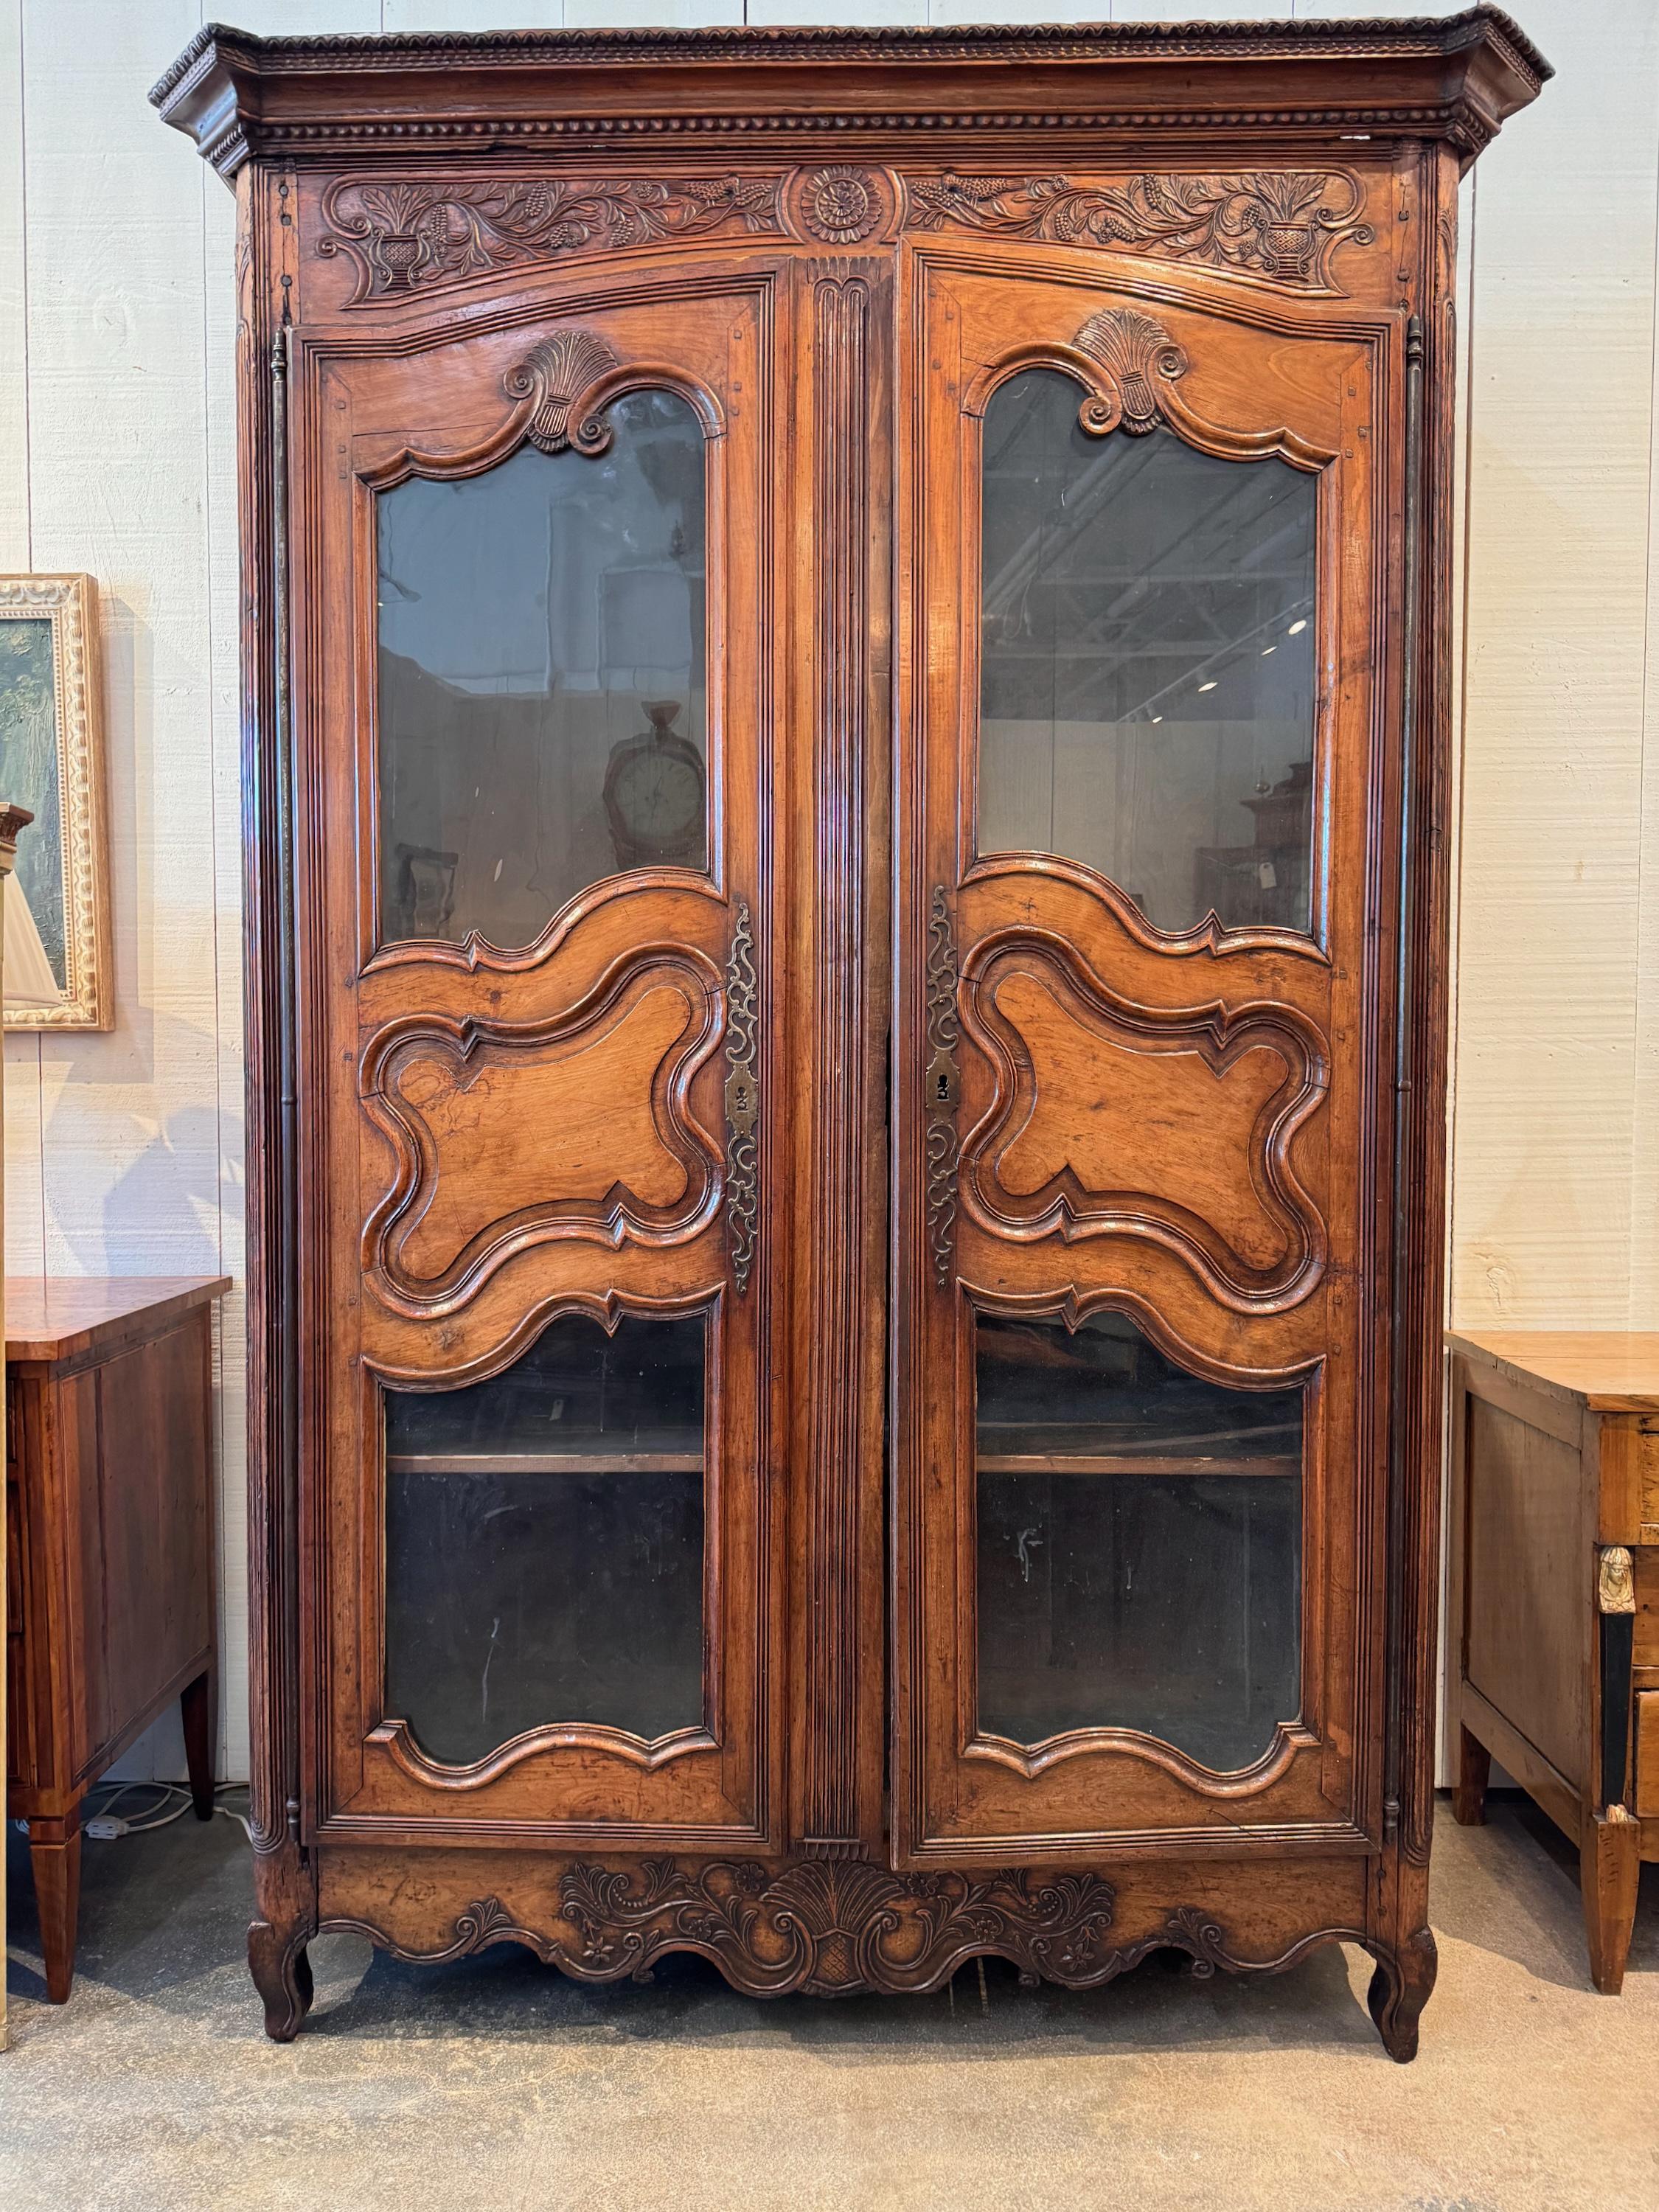 A large French armoire. Great storage or display.